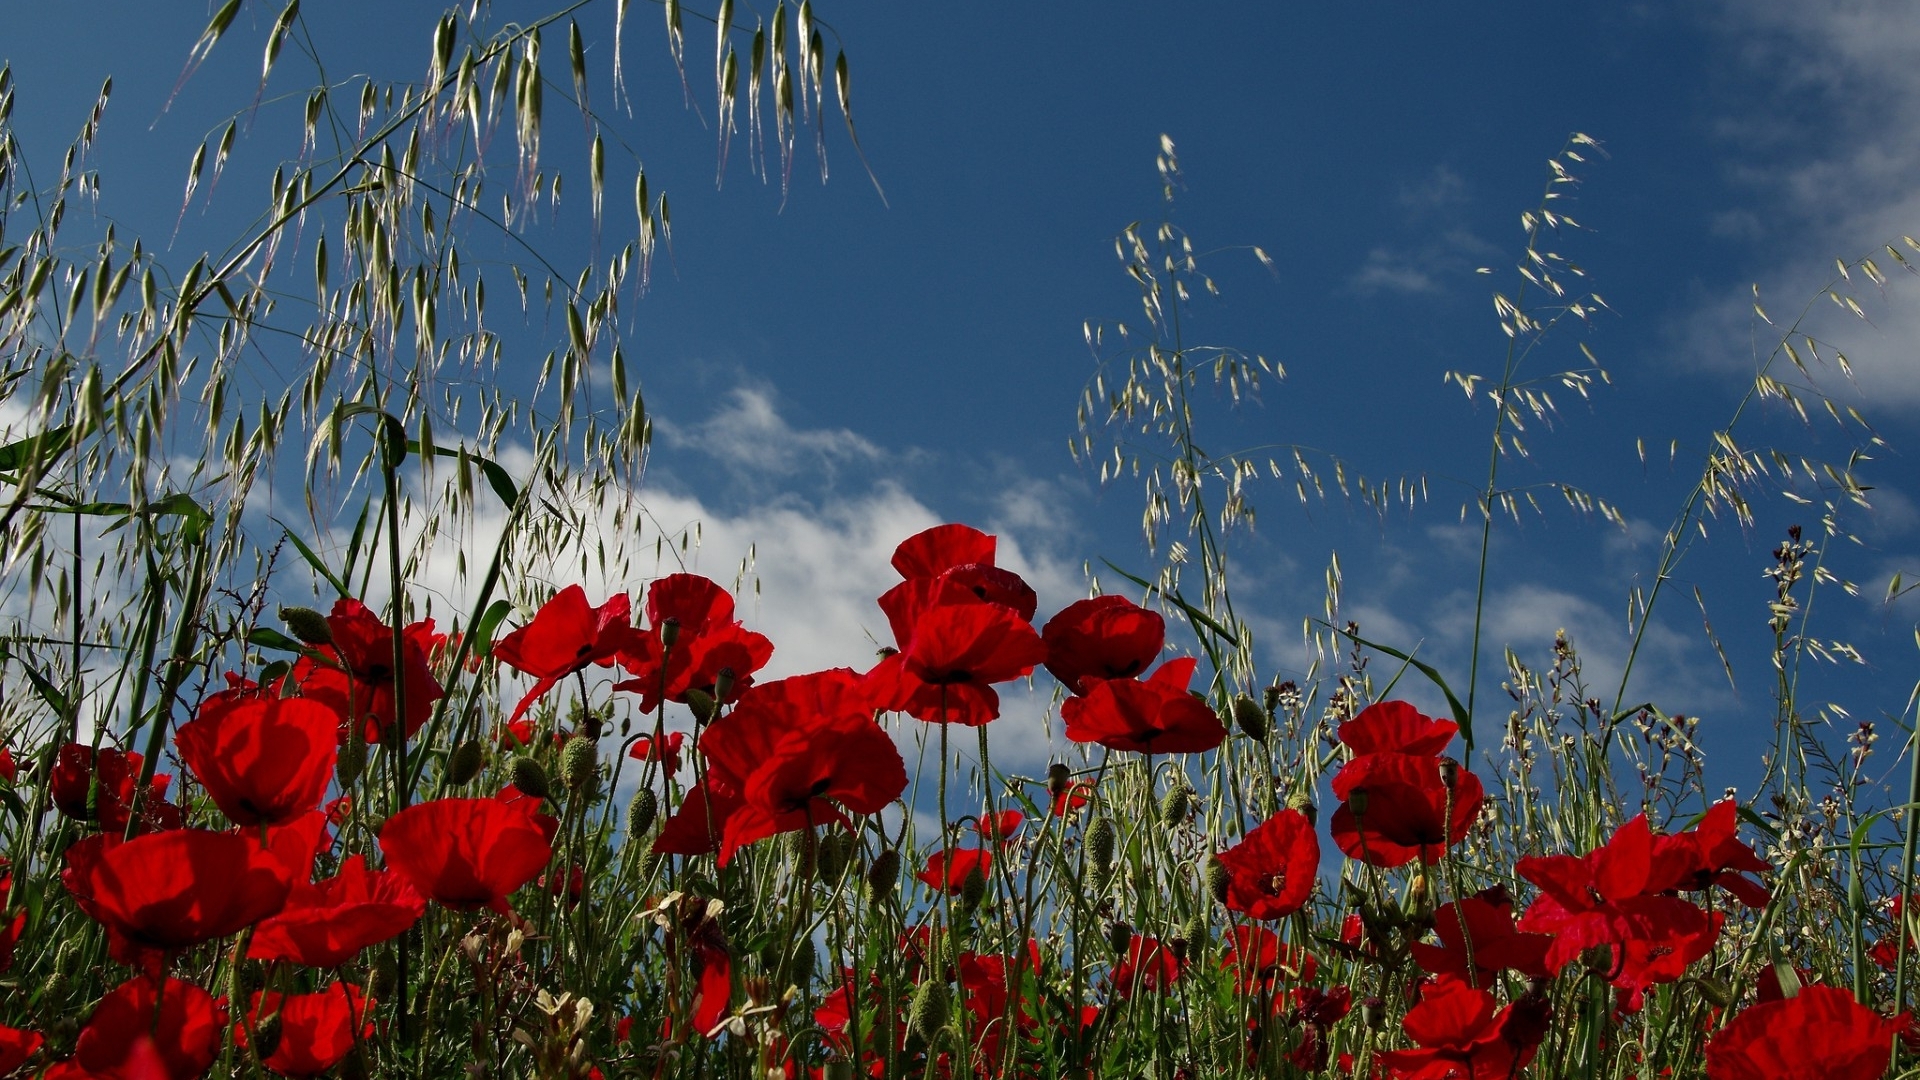 [42+] Wallpapers with Poppies | WallpaperSafari